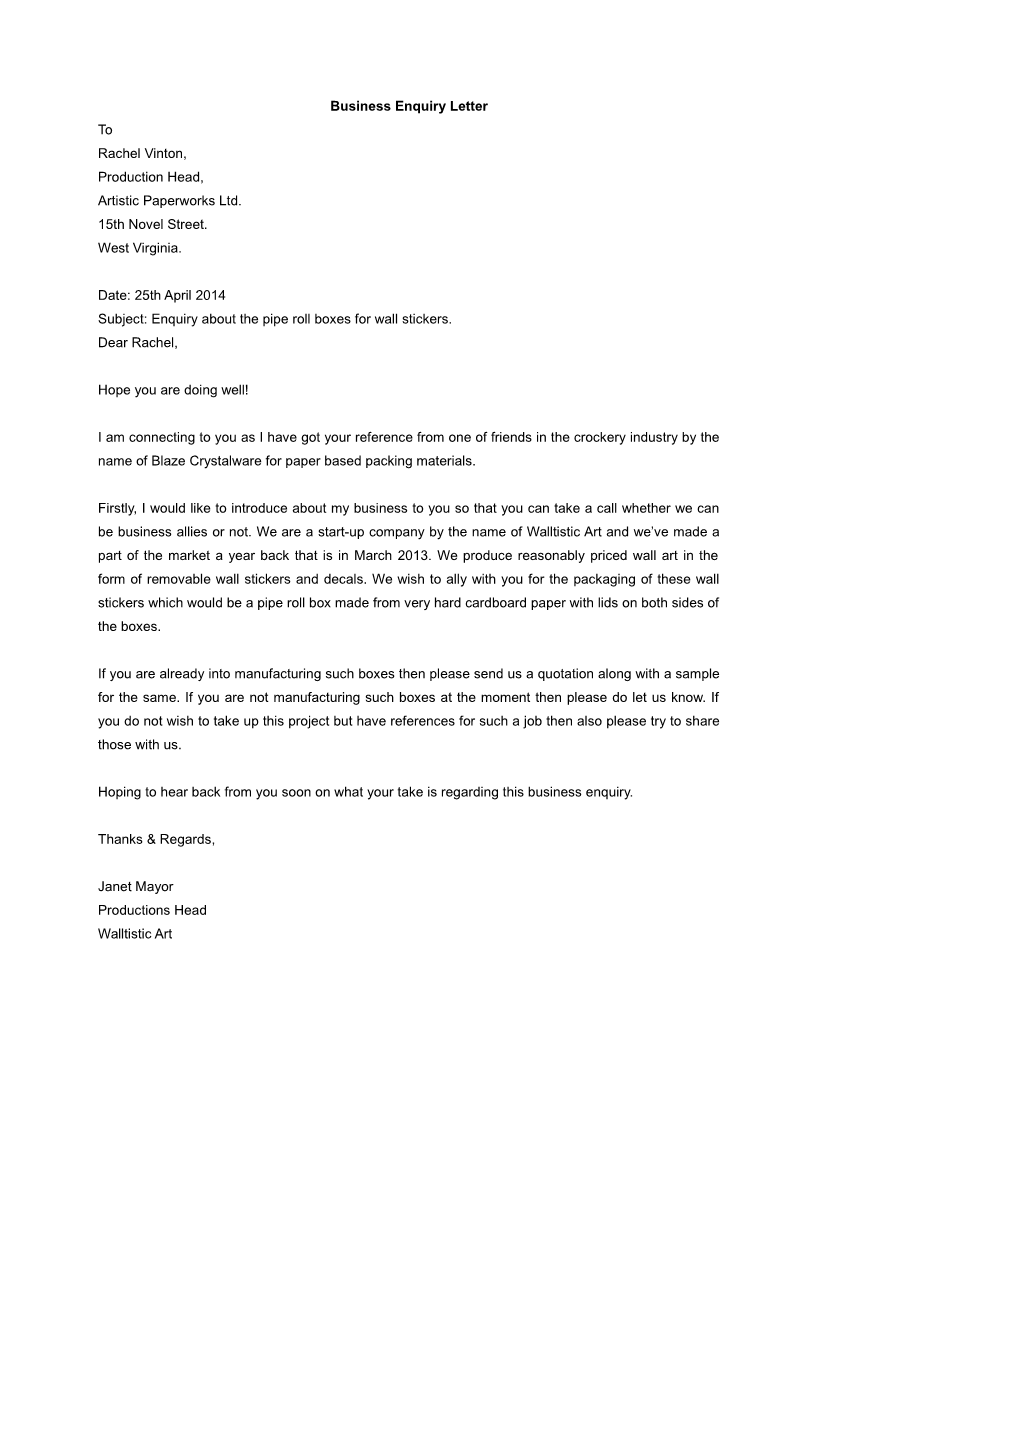 Business Enquiry Letter